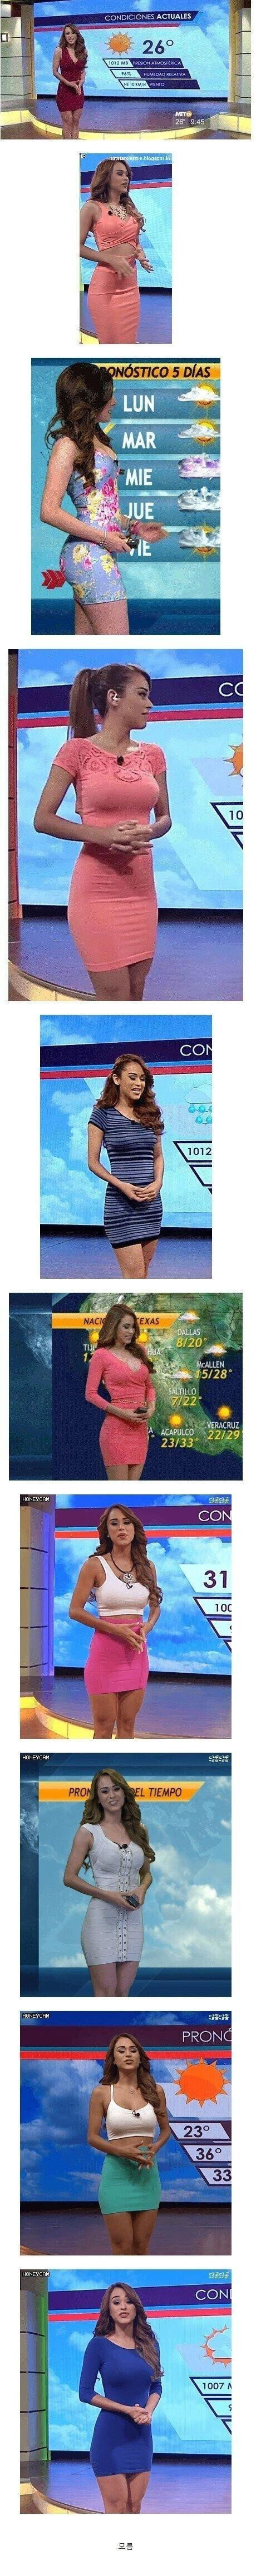 Why Mexico's Weatherman Has a Good Body